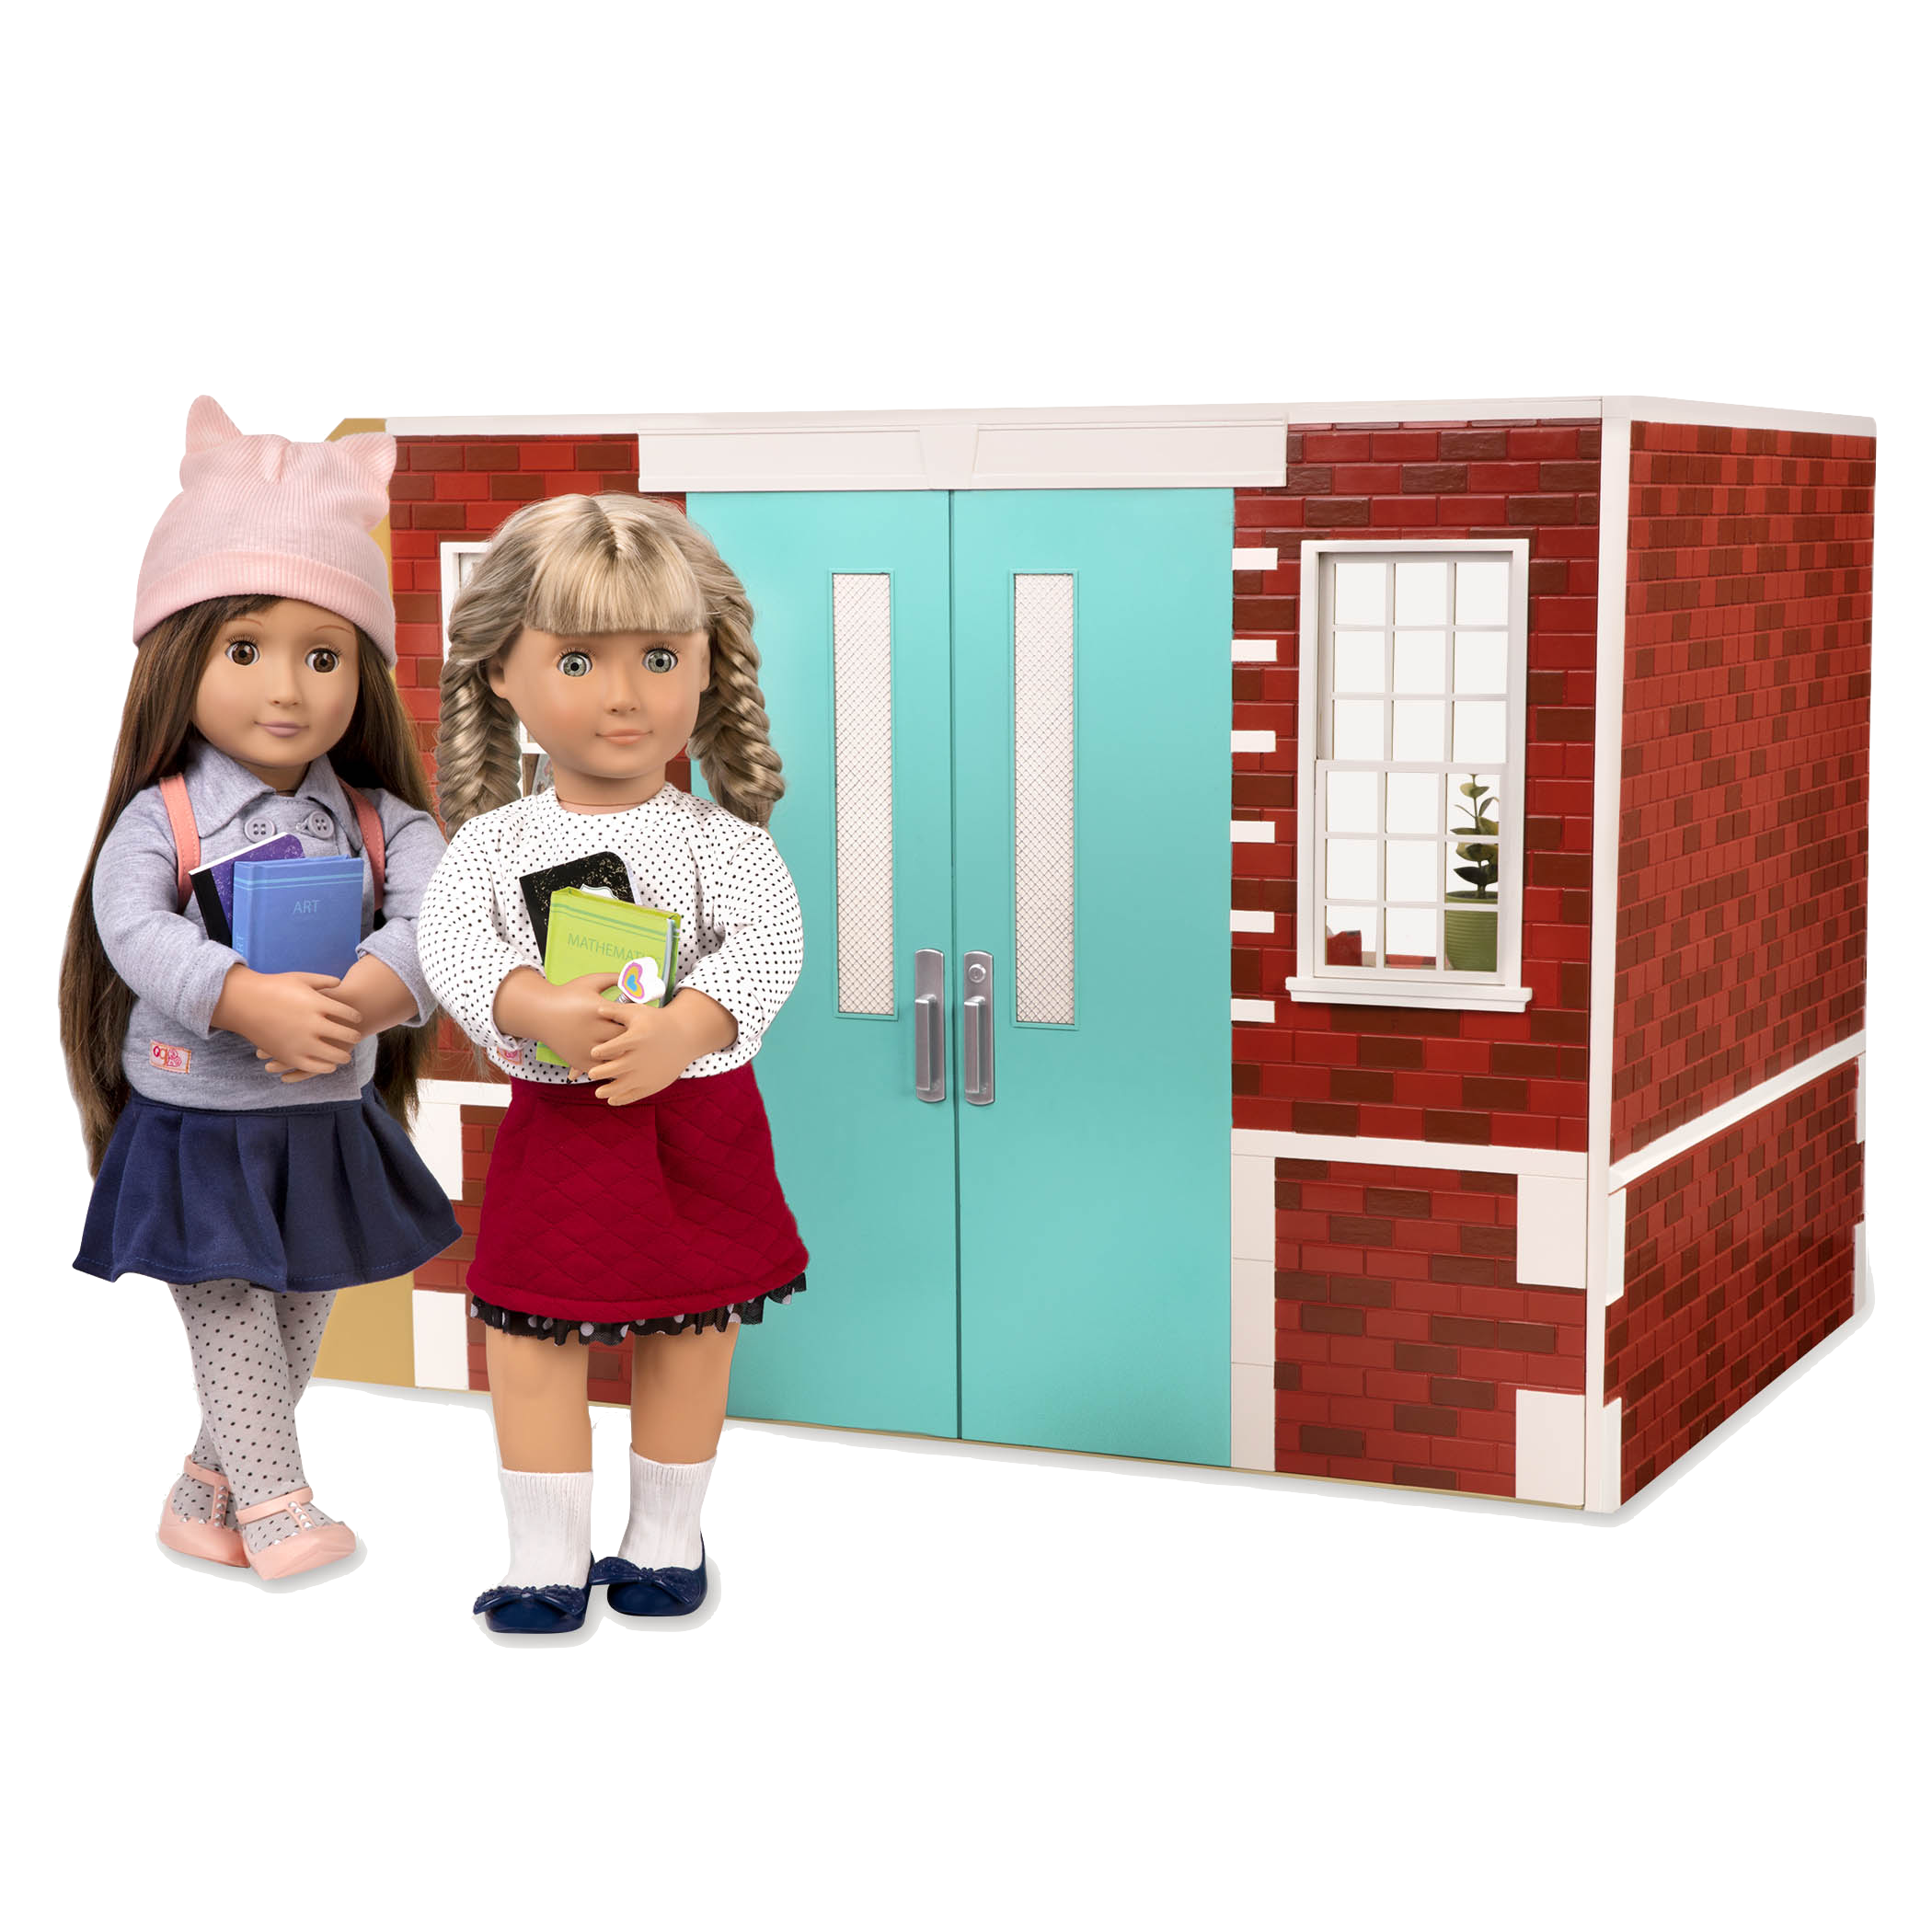 Our Generation Awesome Academy School Room Doll Play Dolls Clothes Pretend New 